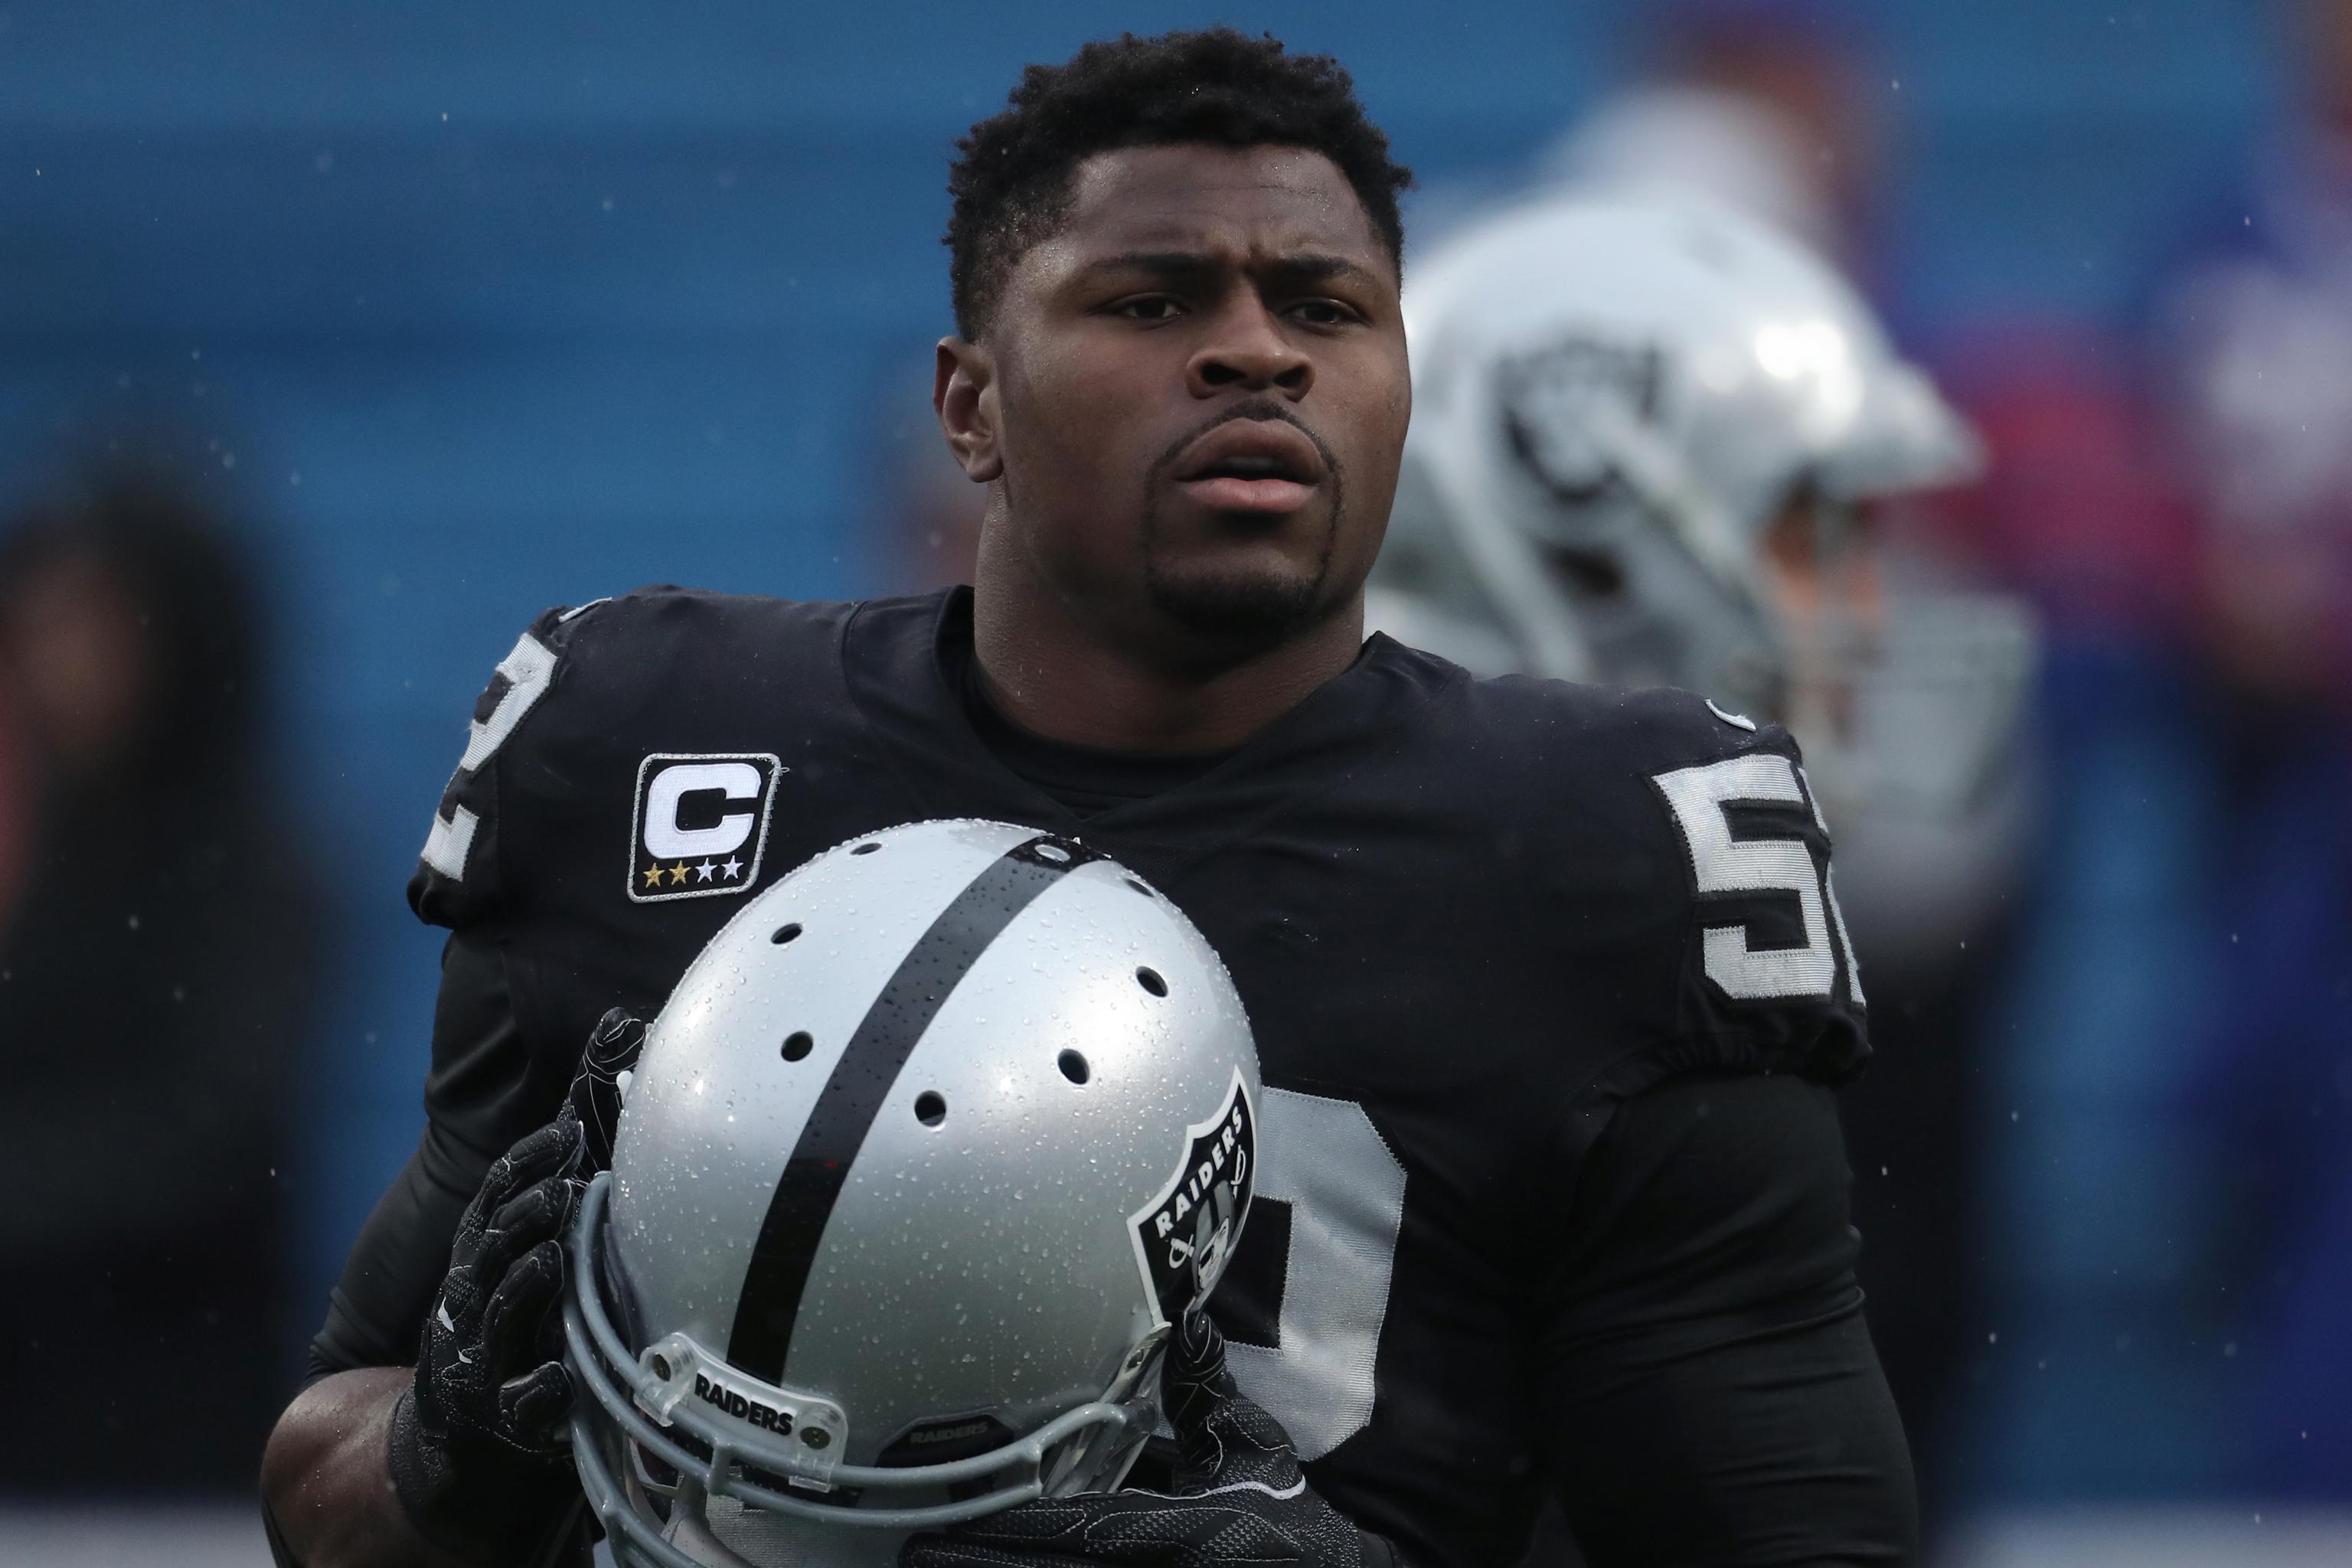 Nfl Rumors Latest Buzz On Possible Khalil Mack Trade Aaron Donald And More Bleacher Report Latest News Videos And Highlights